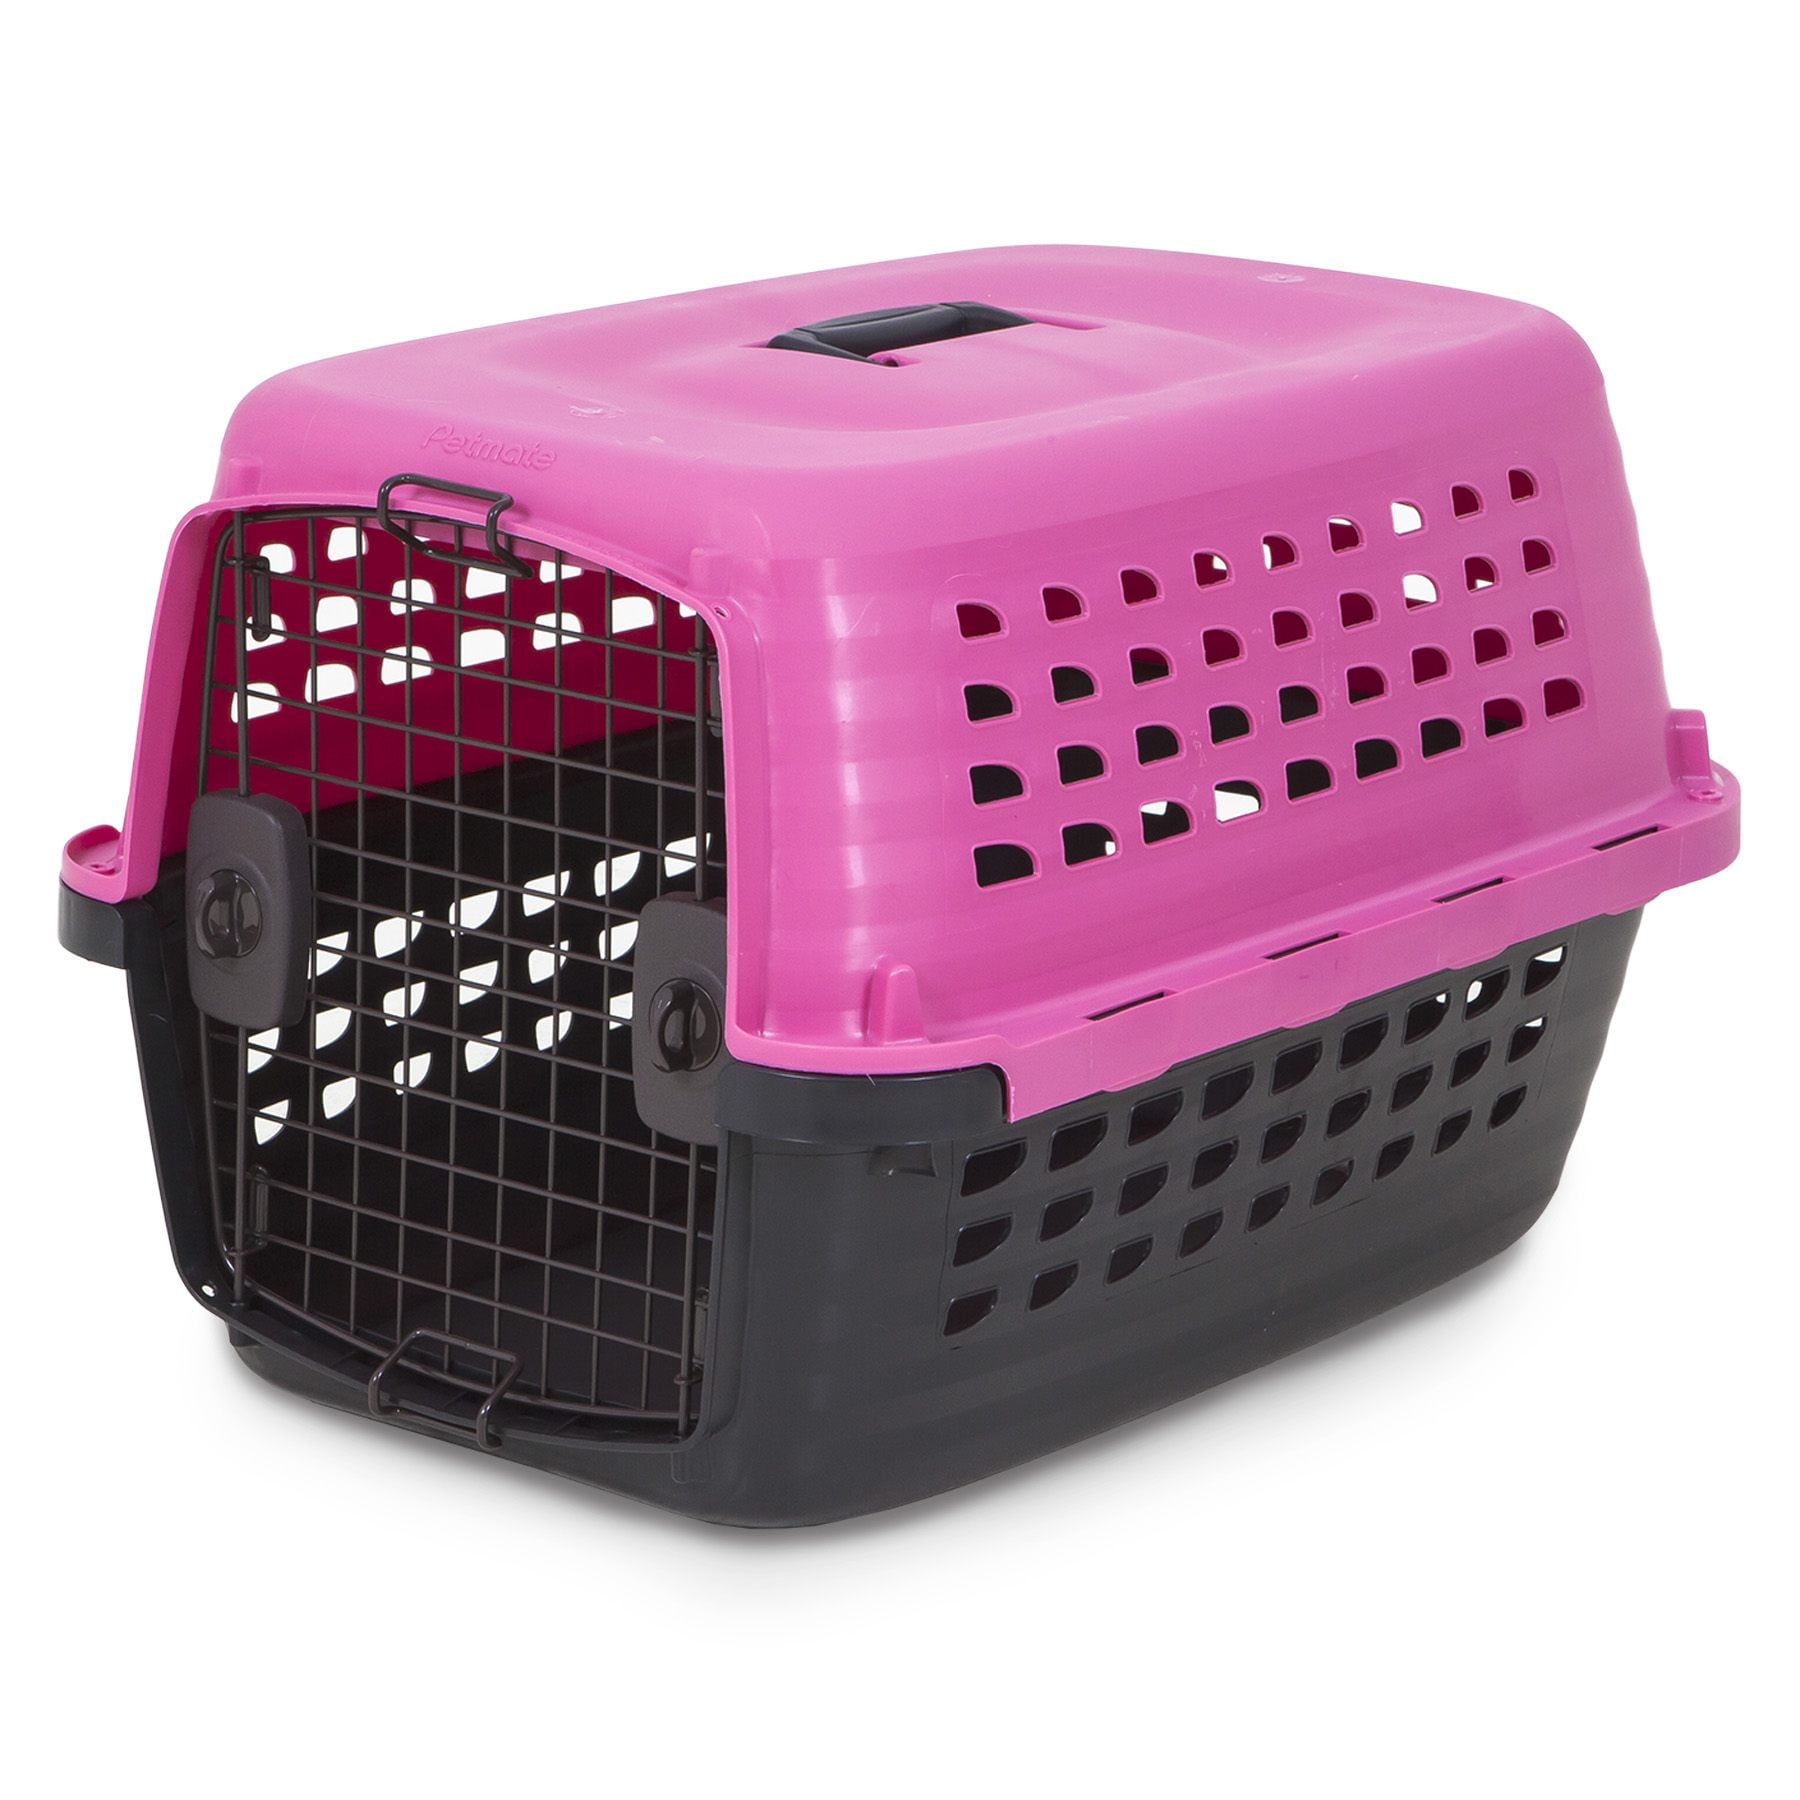 Petmate Compass Fashion Dog and Cat Kennel, Hot Pink, Small, 24L